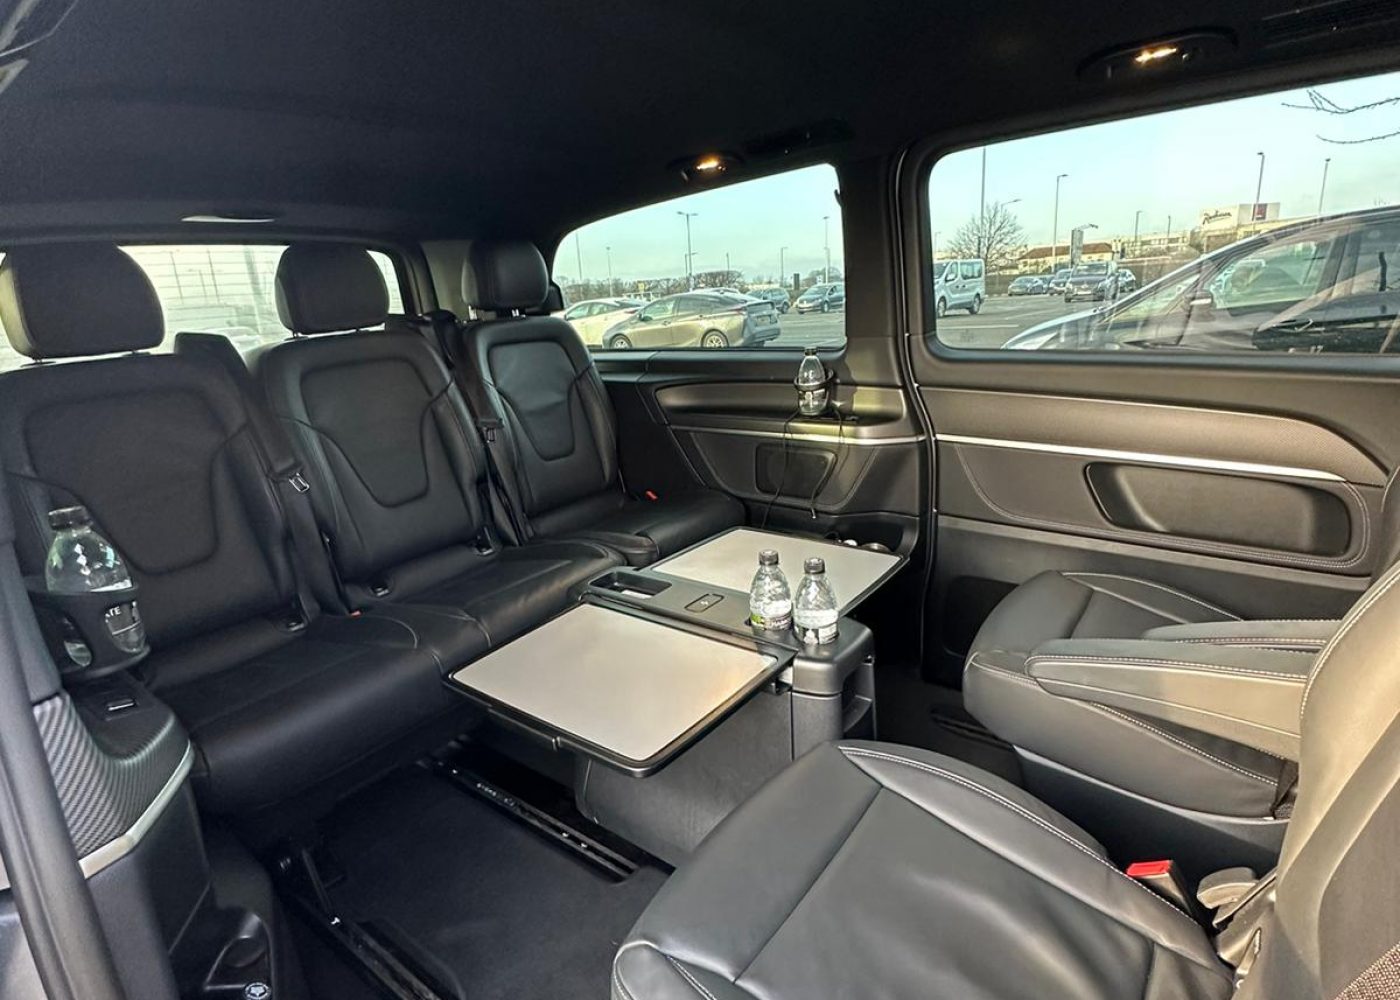 conference-seating in the V-class Mercedes